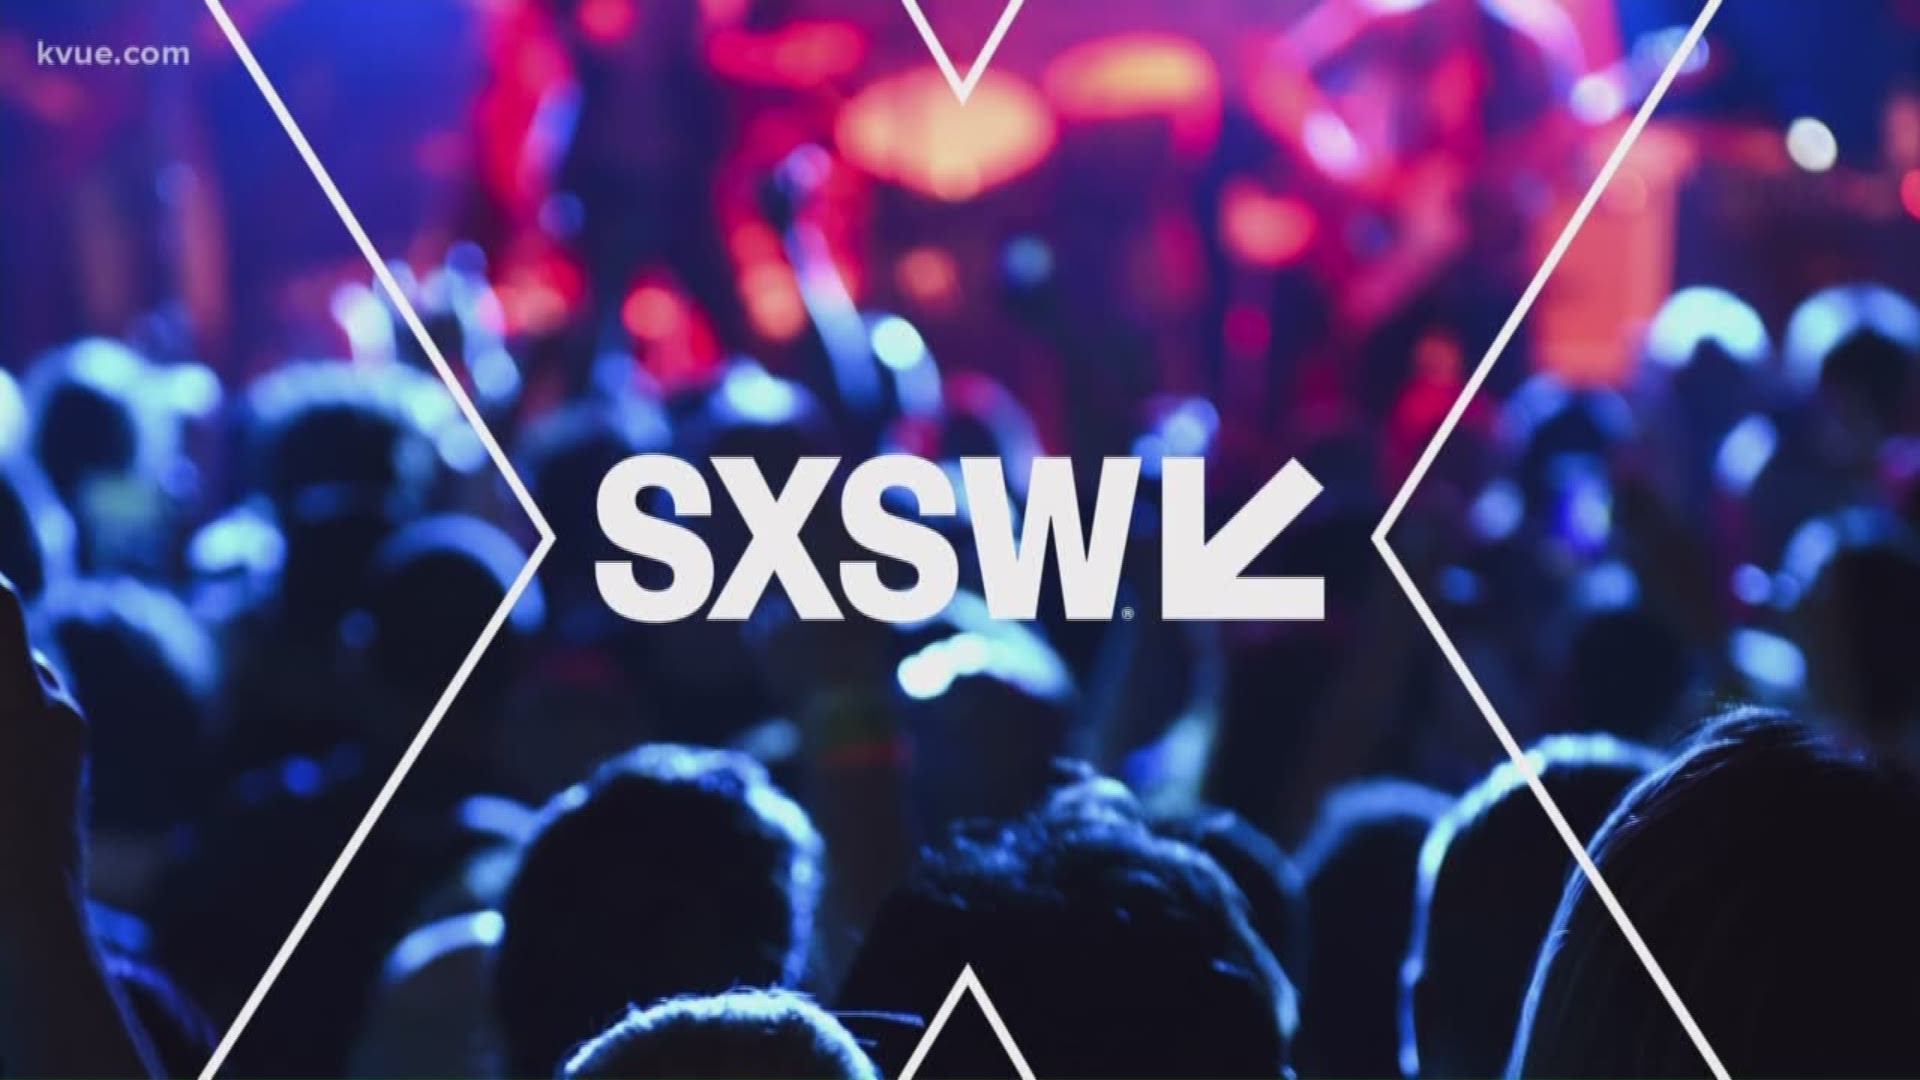 SXSW officially starts Friday, but people are already pouring into Austin.